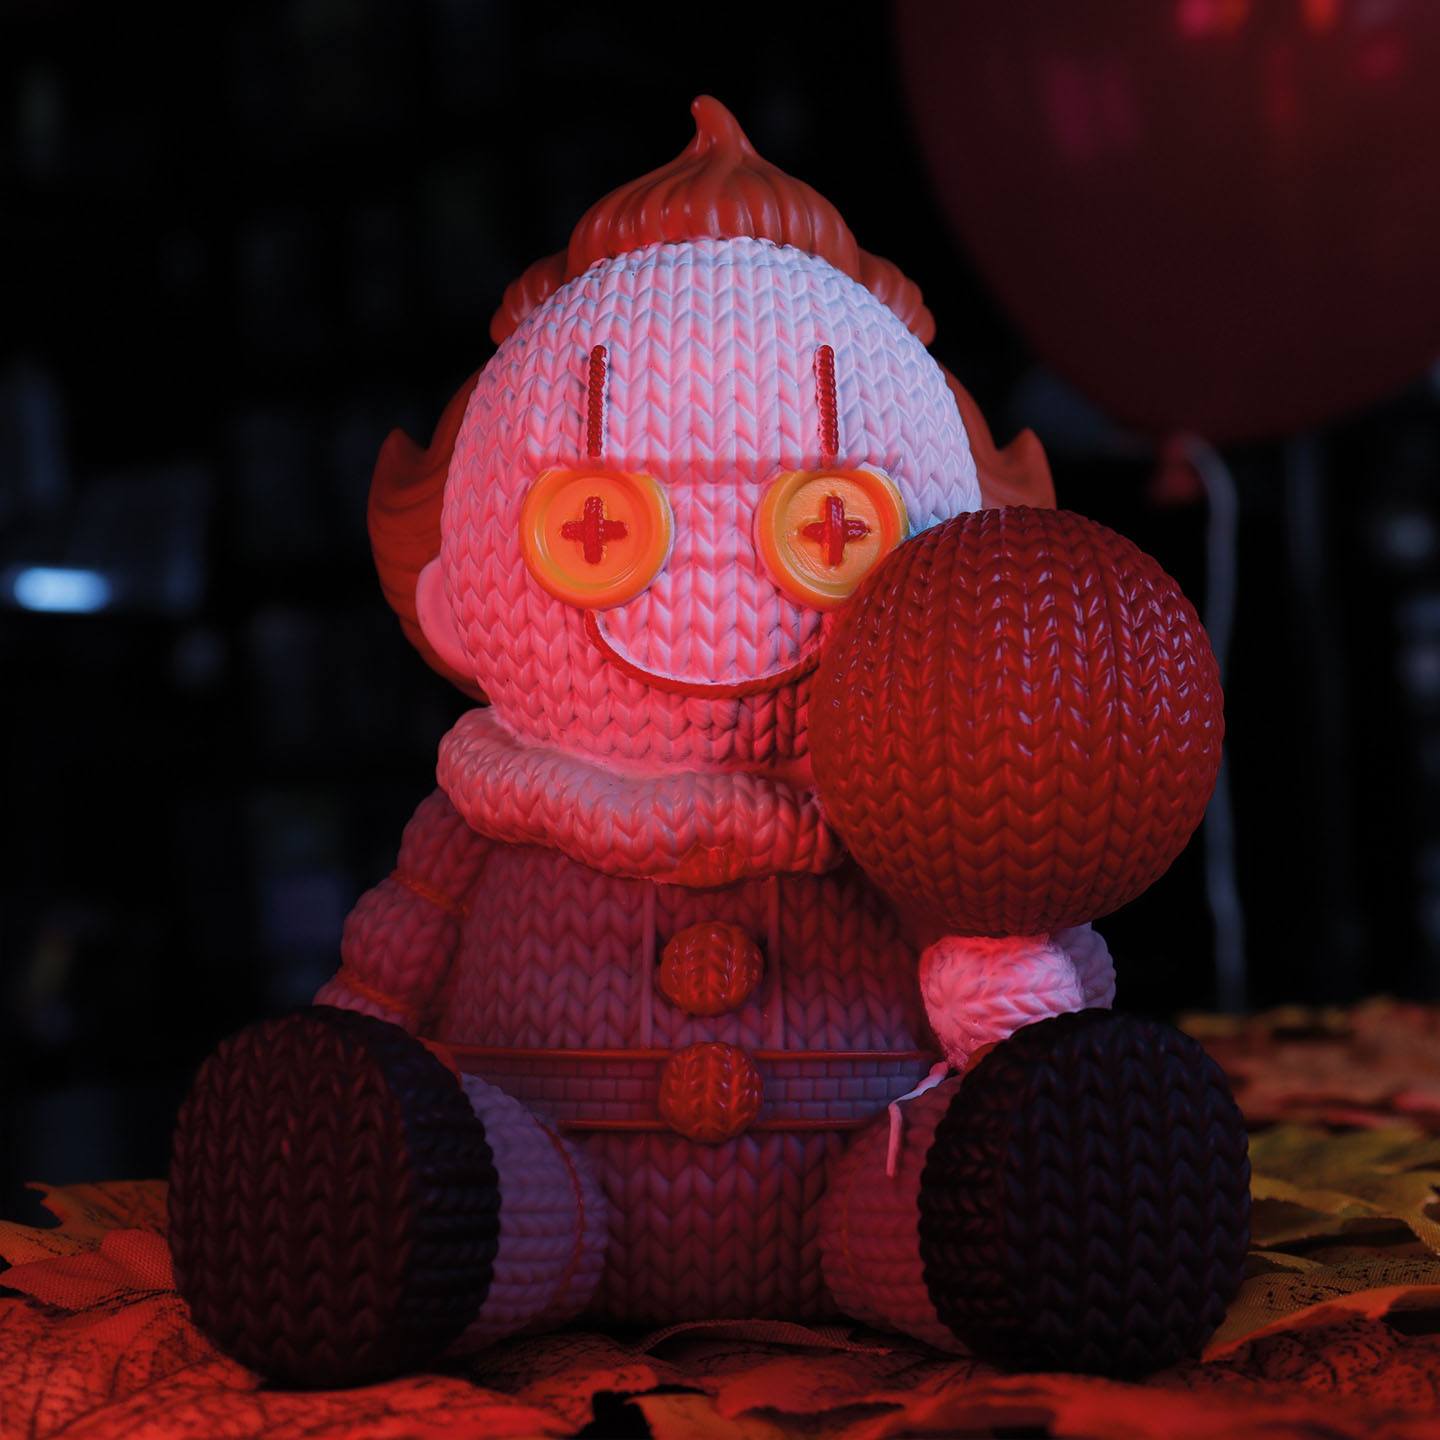 IT Pennywise - Knit Serie 